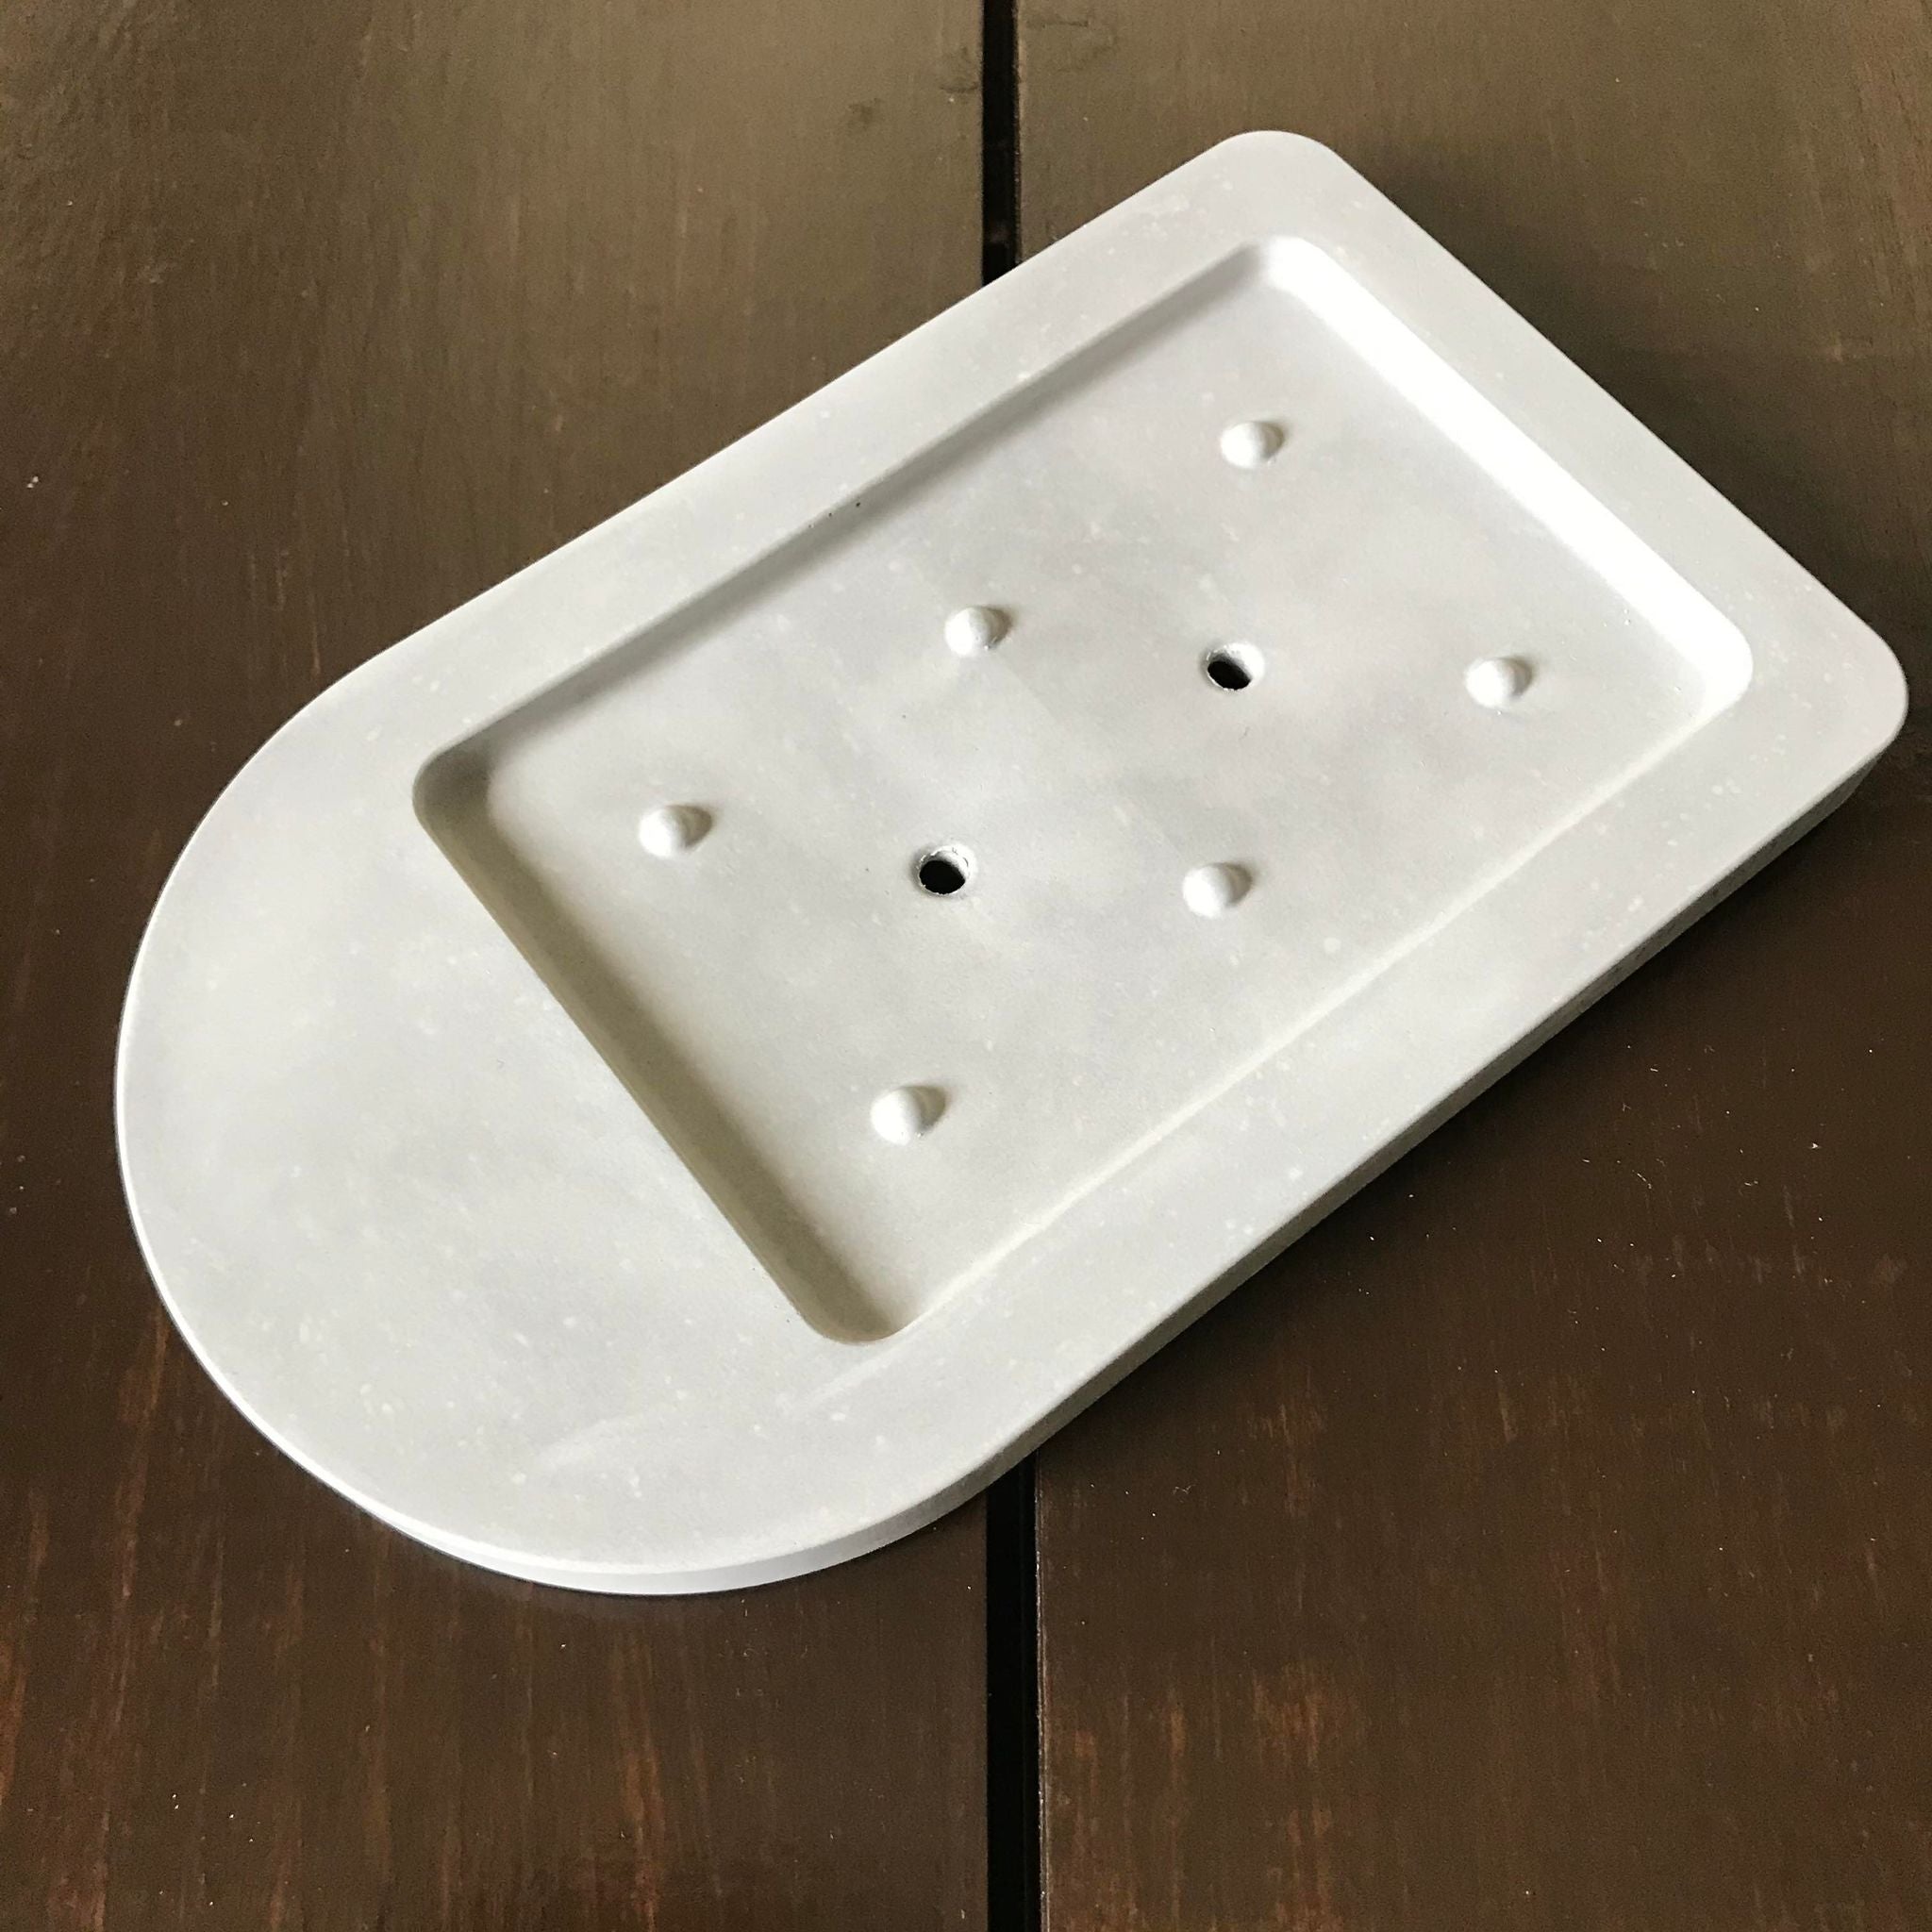 This Plantish self-drying soap dish is made of Diatomite (fossilized algae) which is a 100% renewable, plant-based material